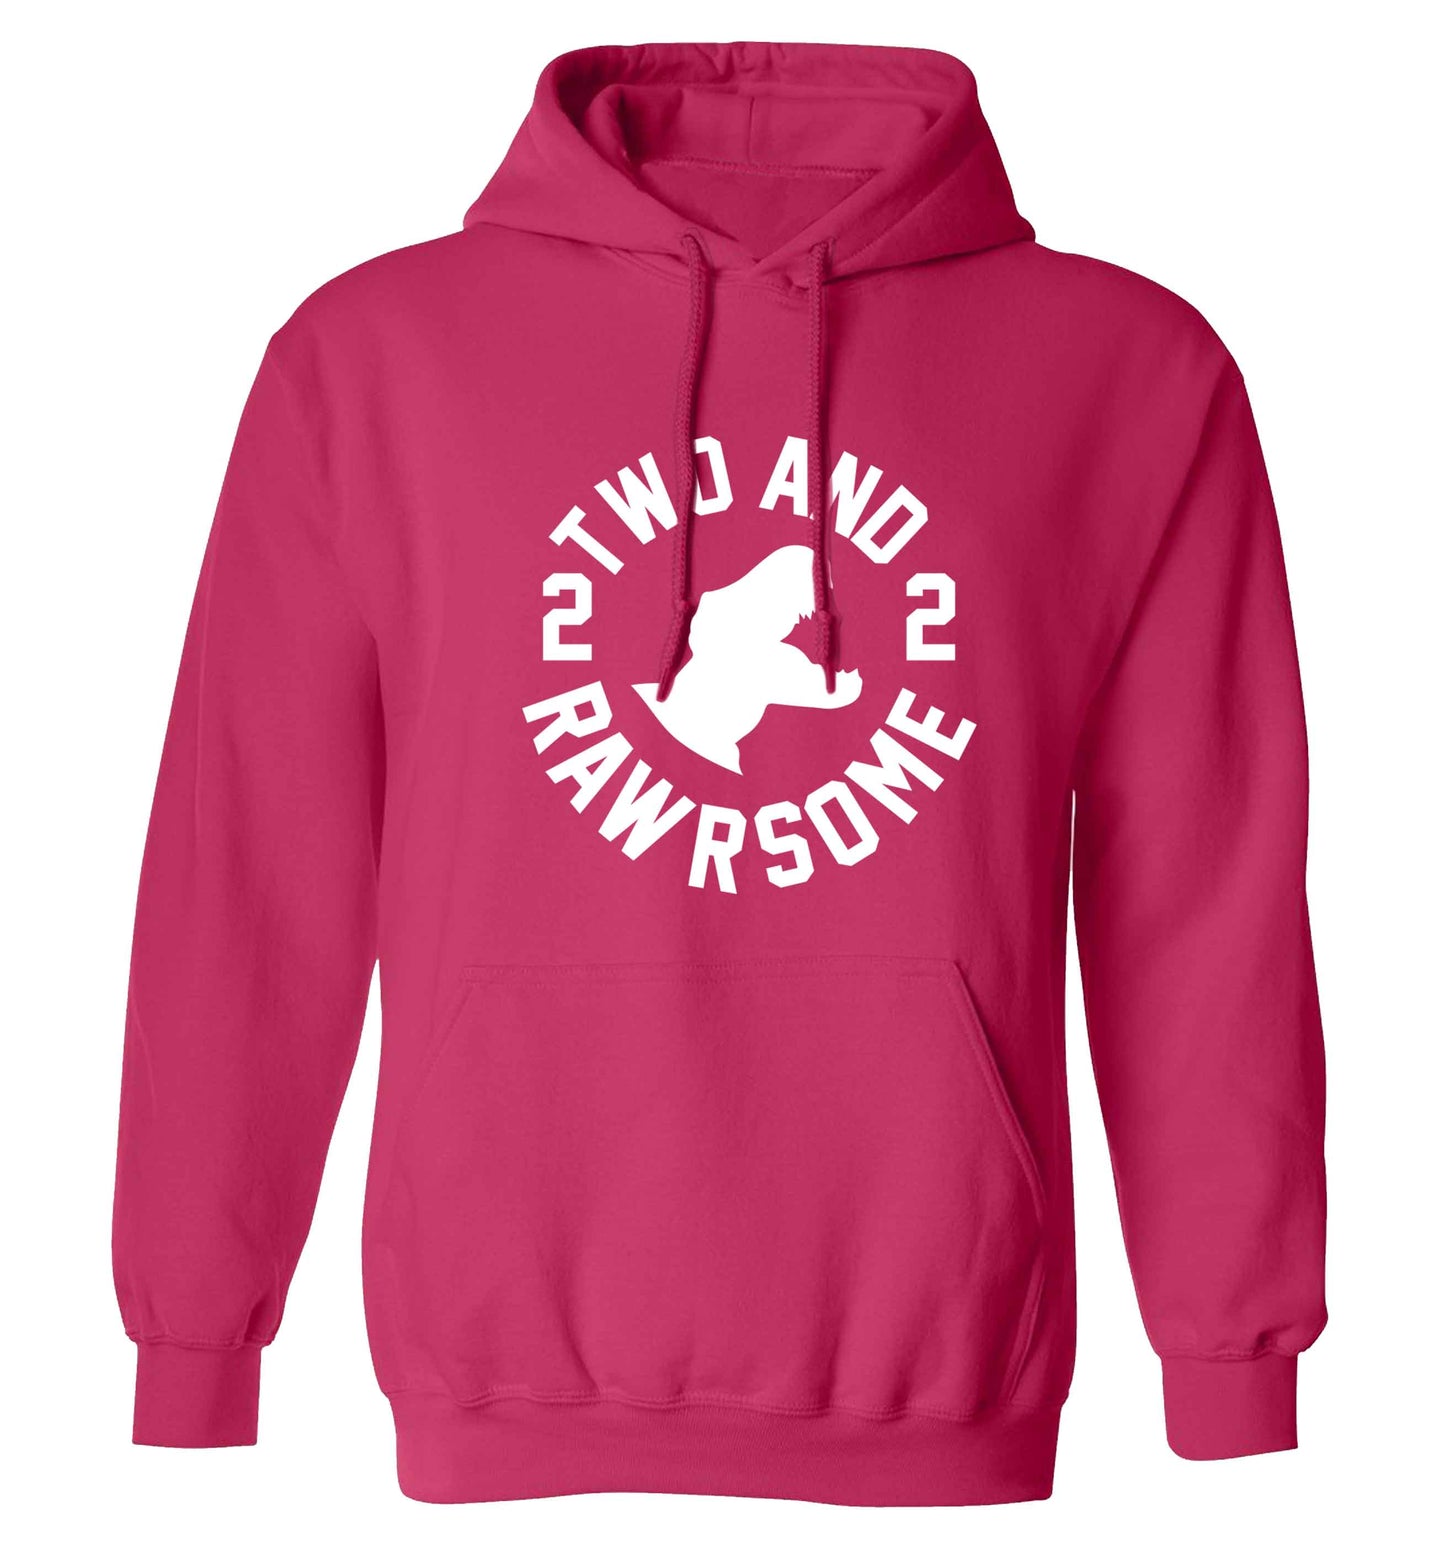 Two and rawrsome adults unisex pink hoodie 2XL